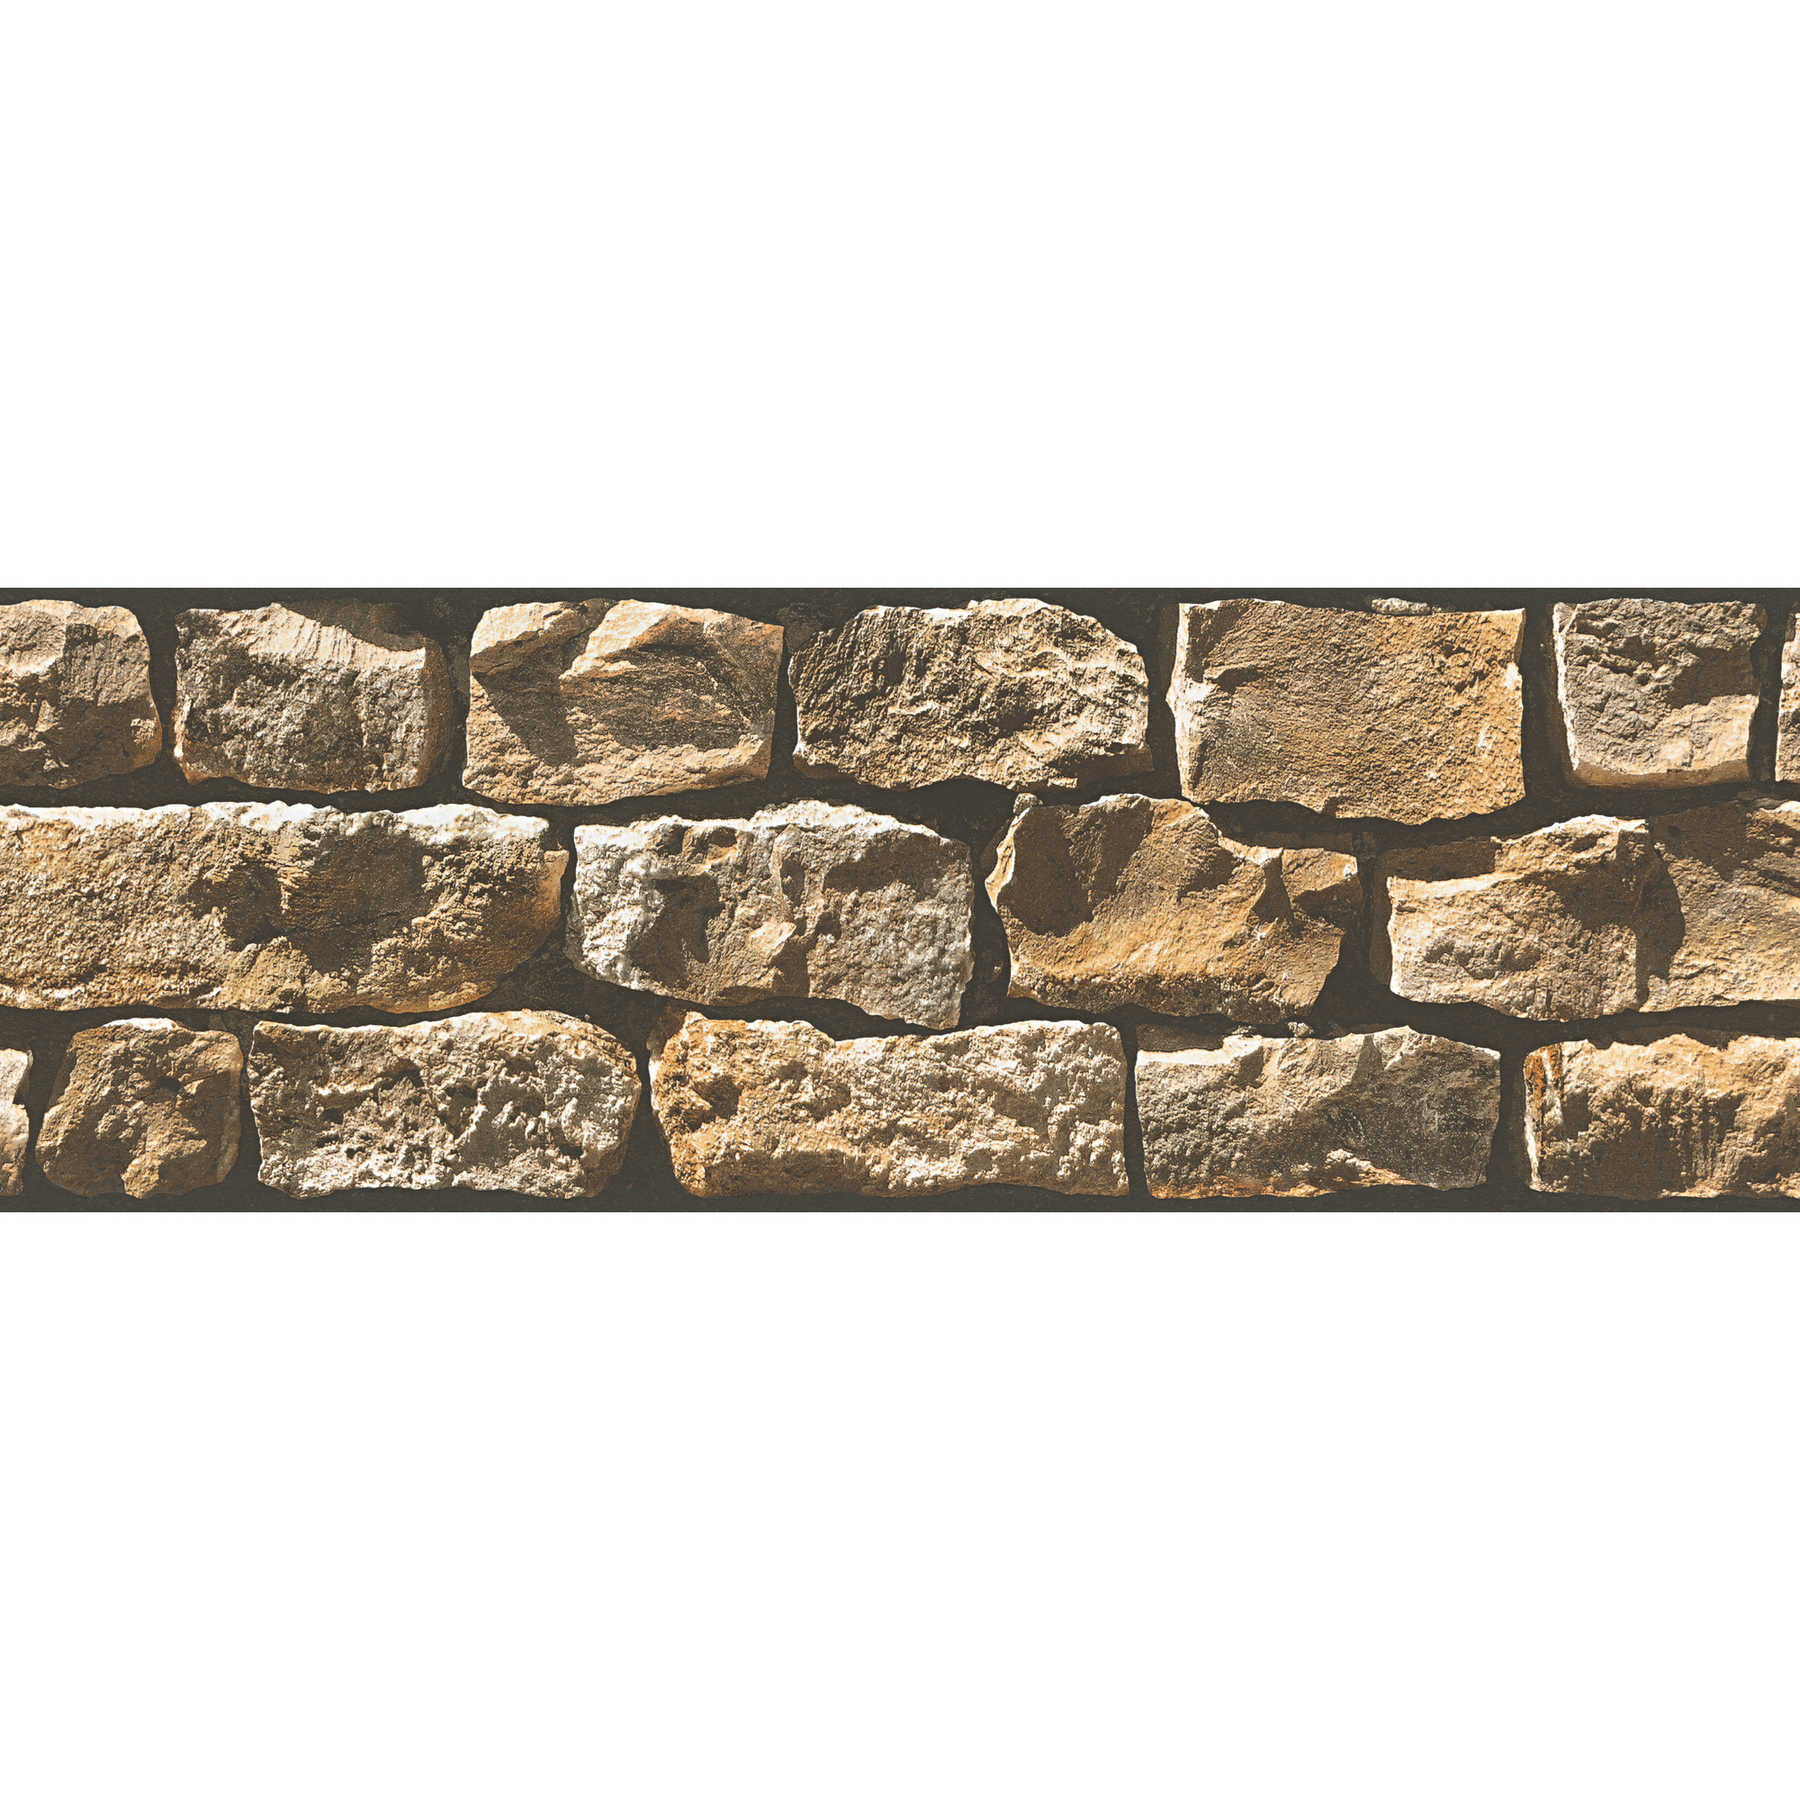 Stone look wallpaper border with 3D effect - beige, brown
